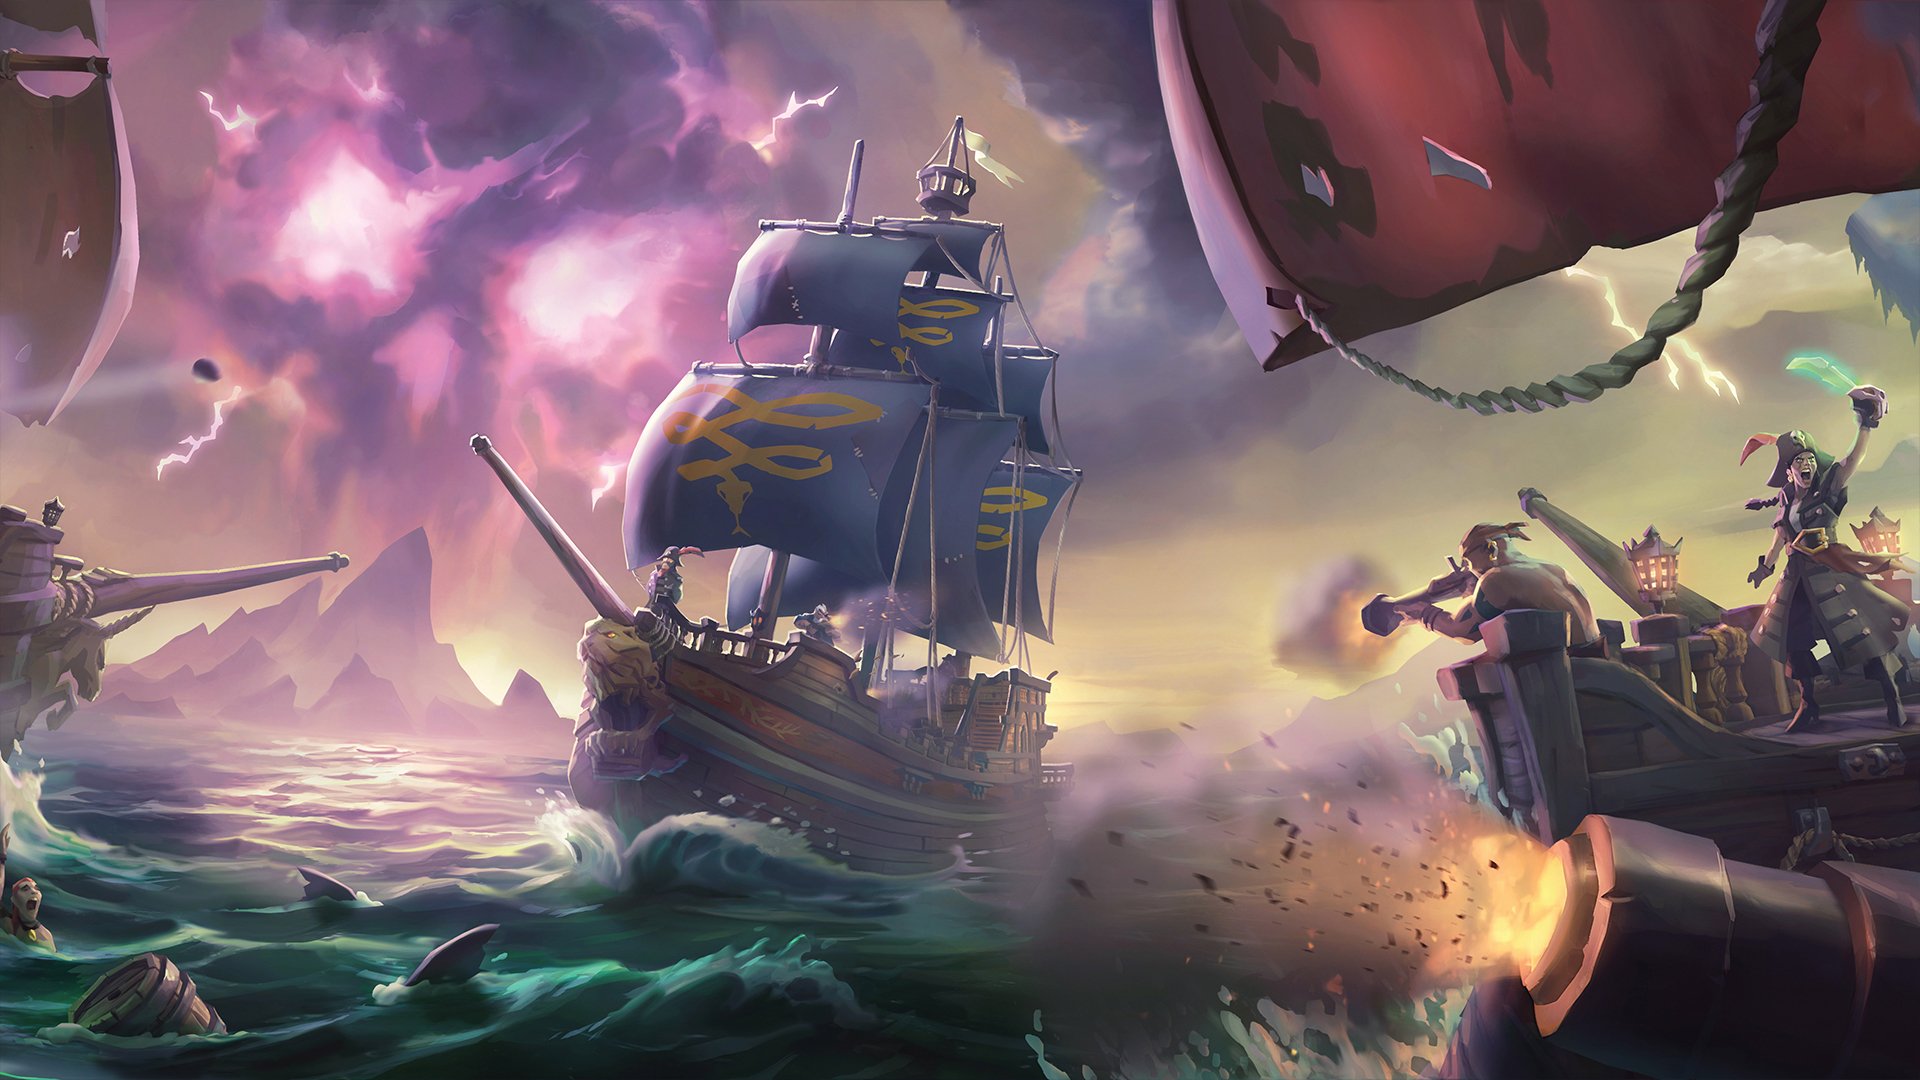 Sea of Thieves (Xbox One, PC) Review - Wide as an ocean, shallow as a